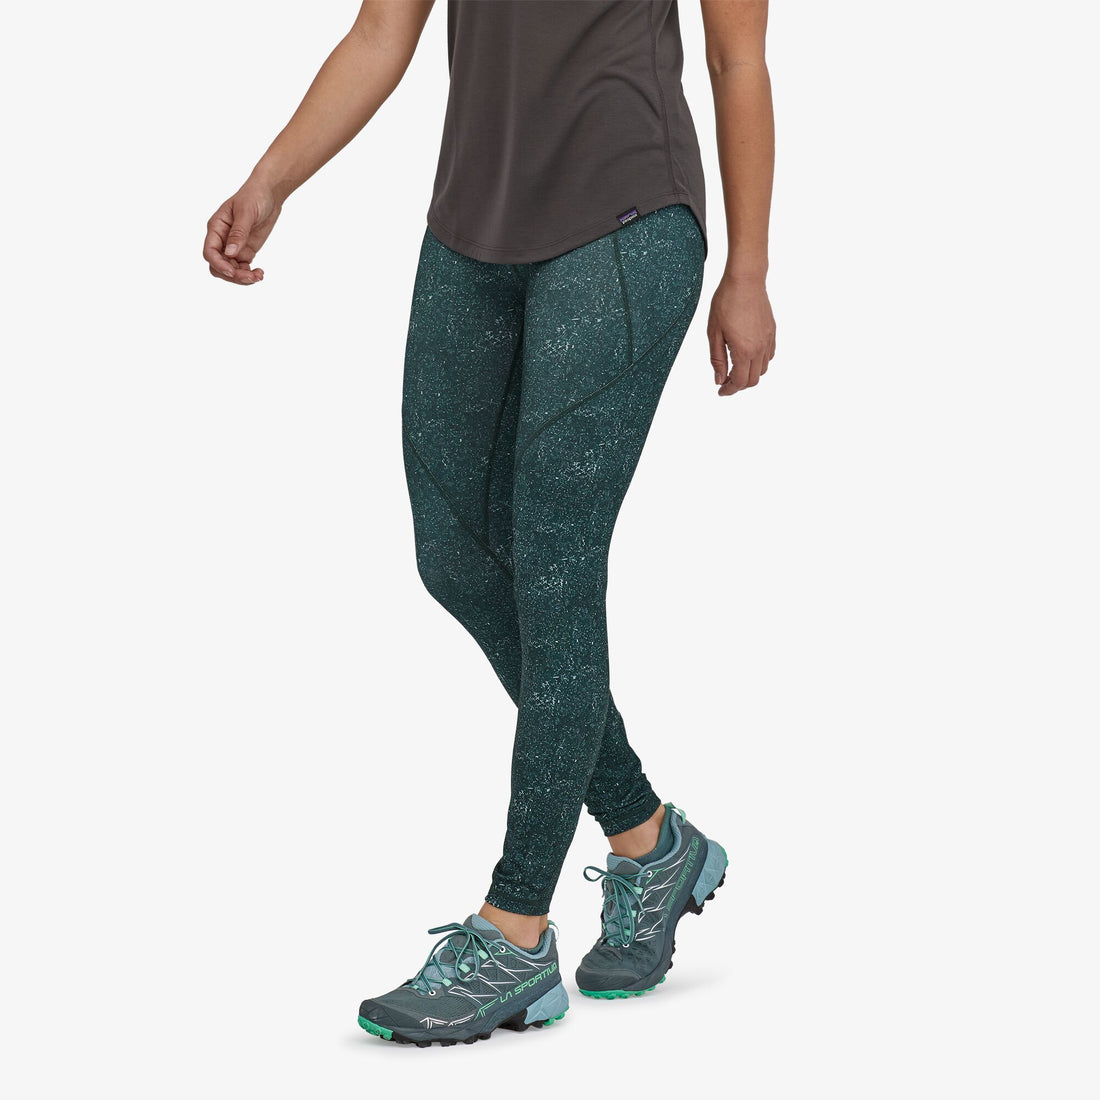 Centered Tights - Cosmic Carving: Northern Green